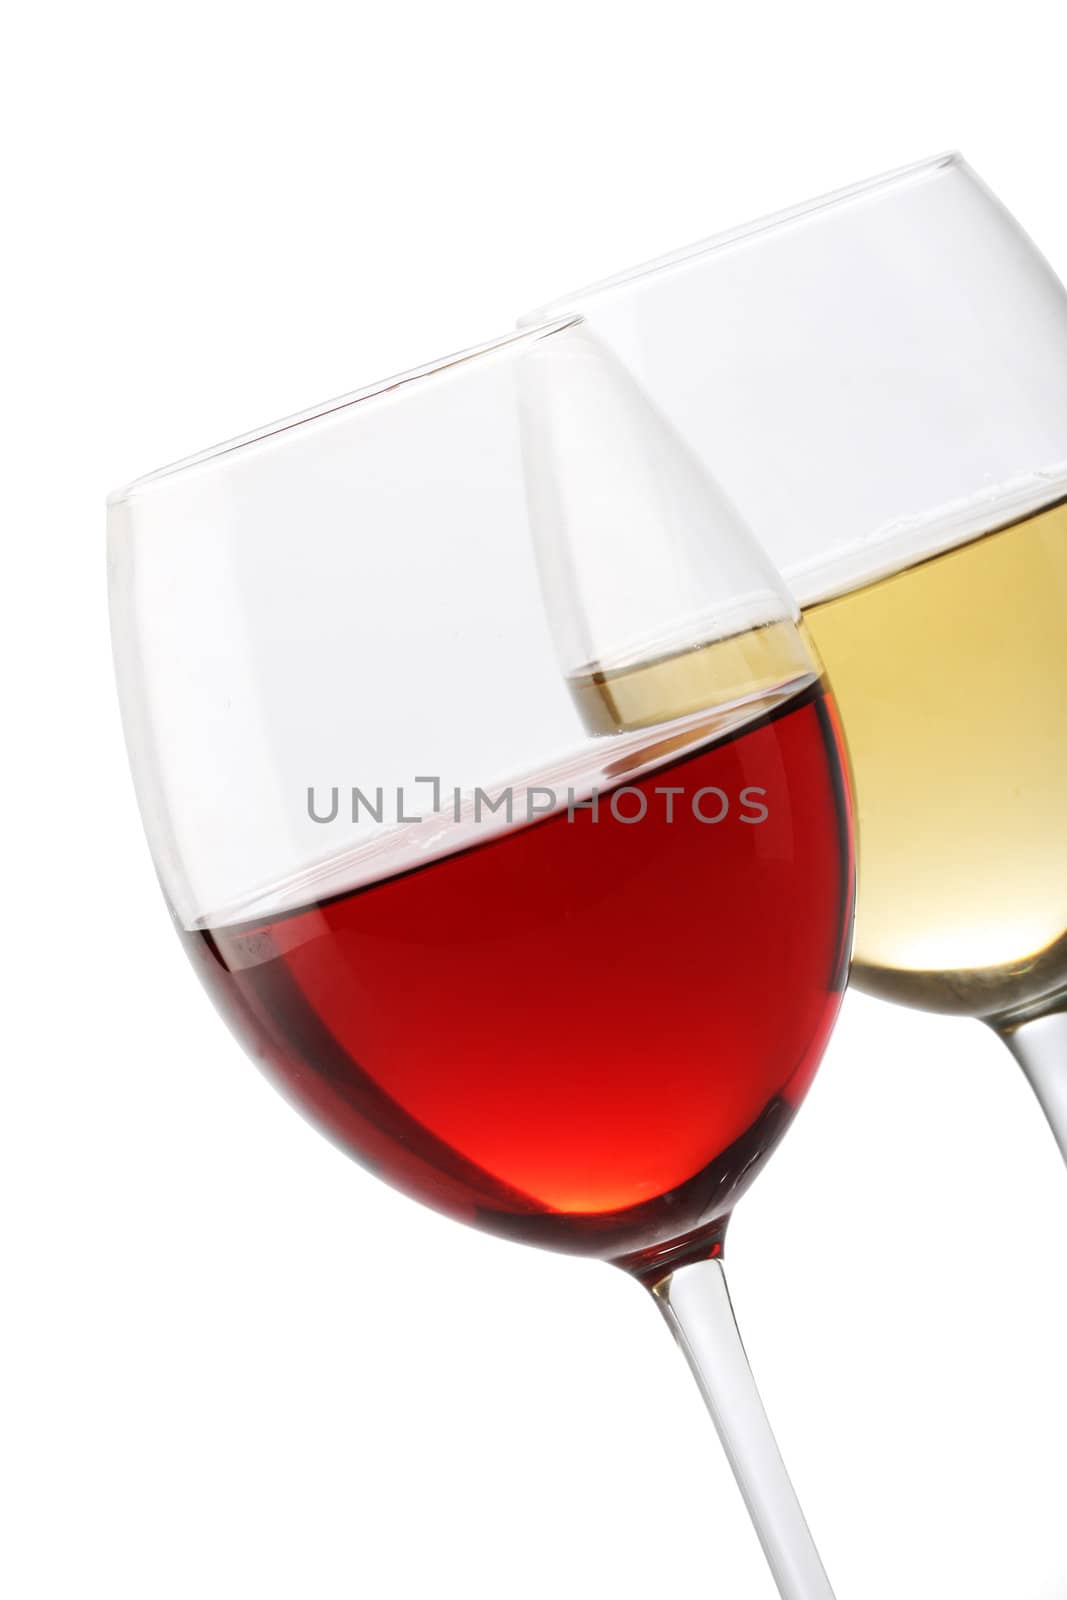 Two glasses of wine, one with red and the other with white